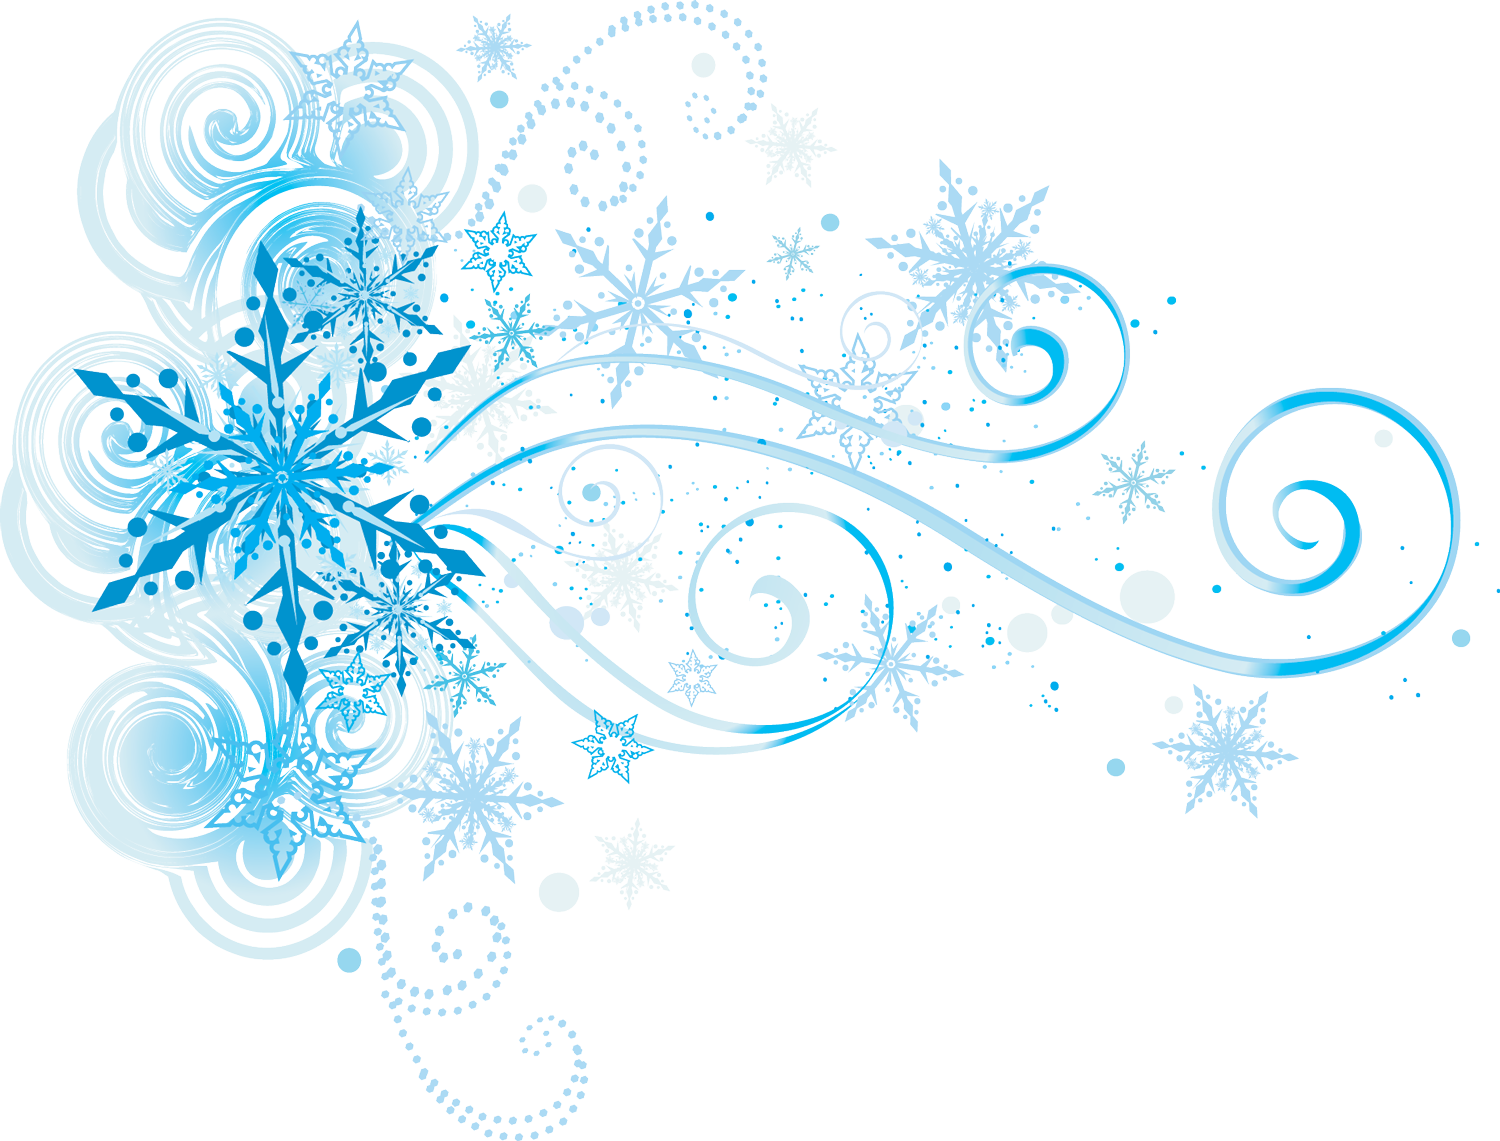 blue snowflakes with blue swirls